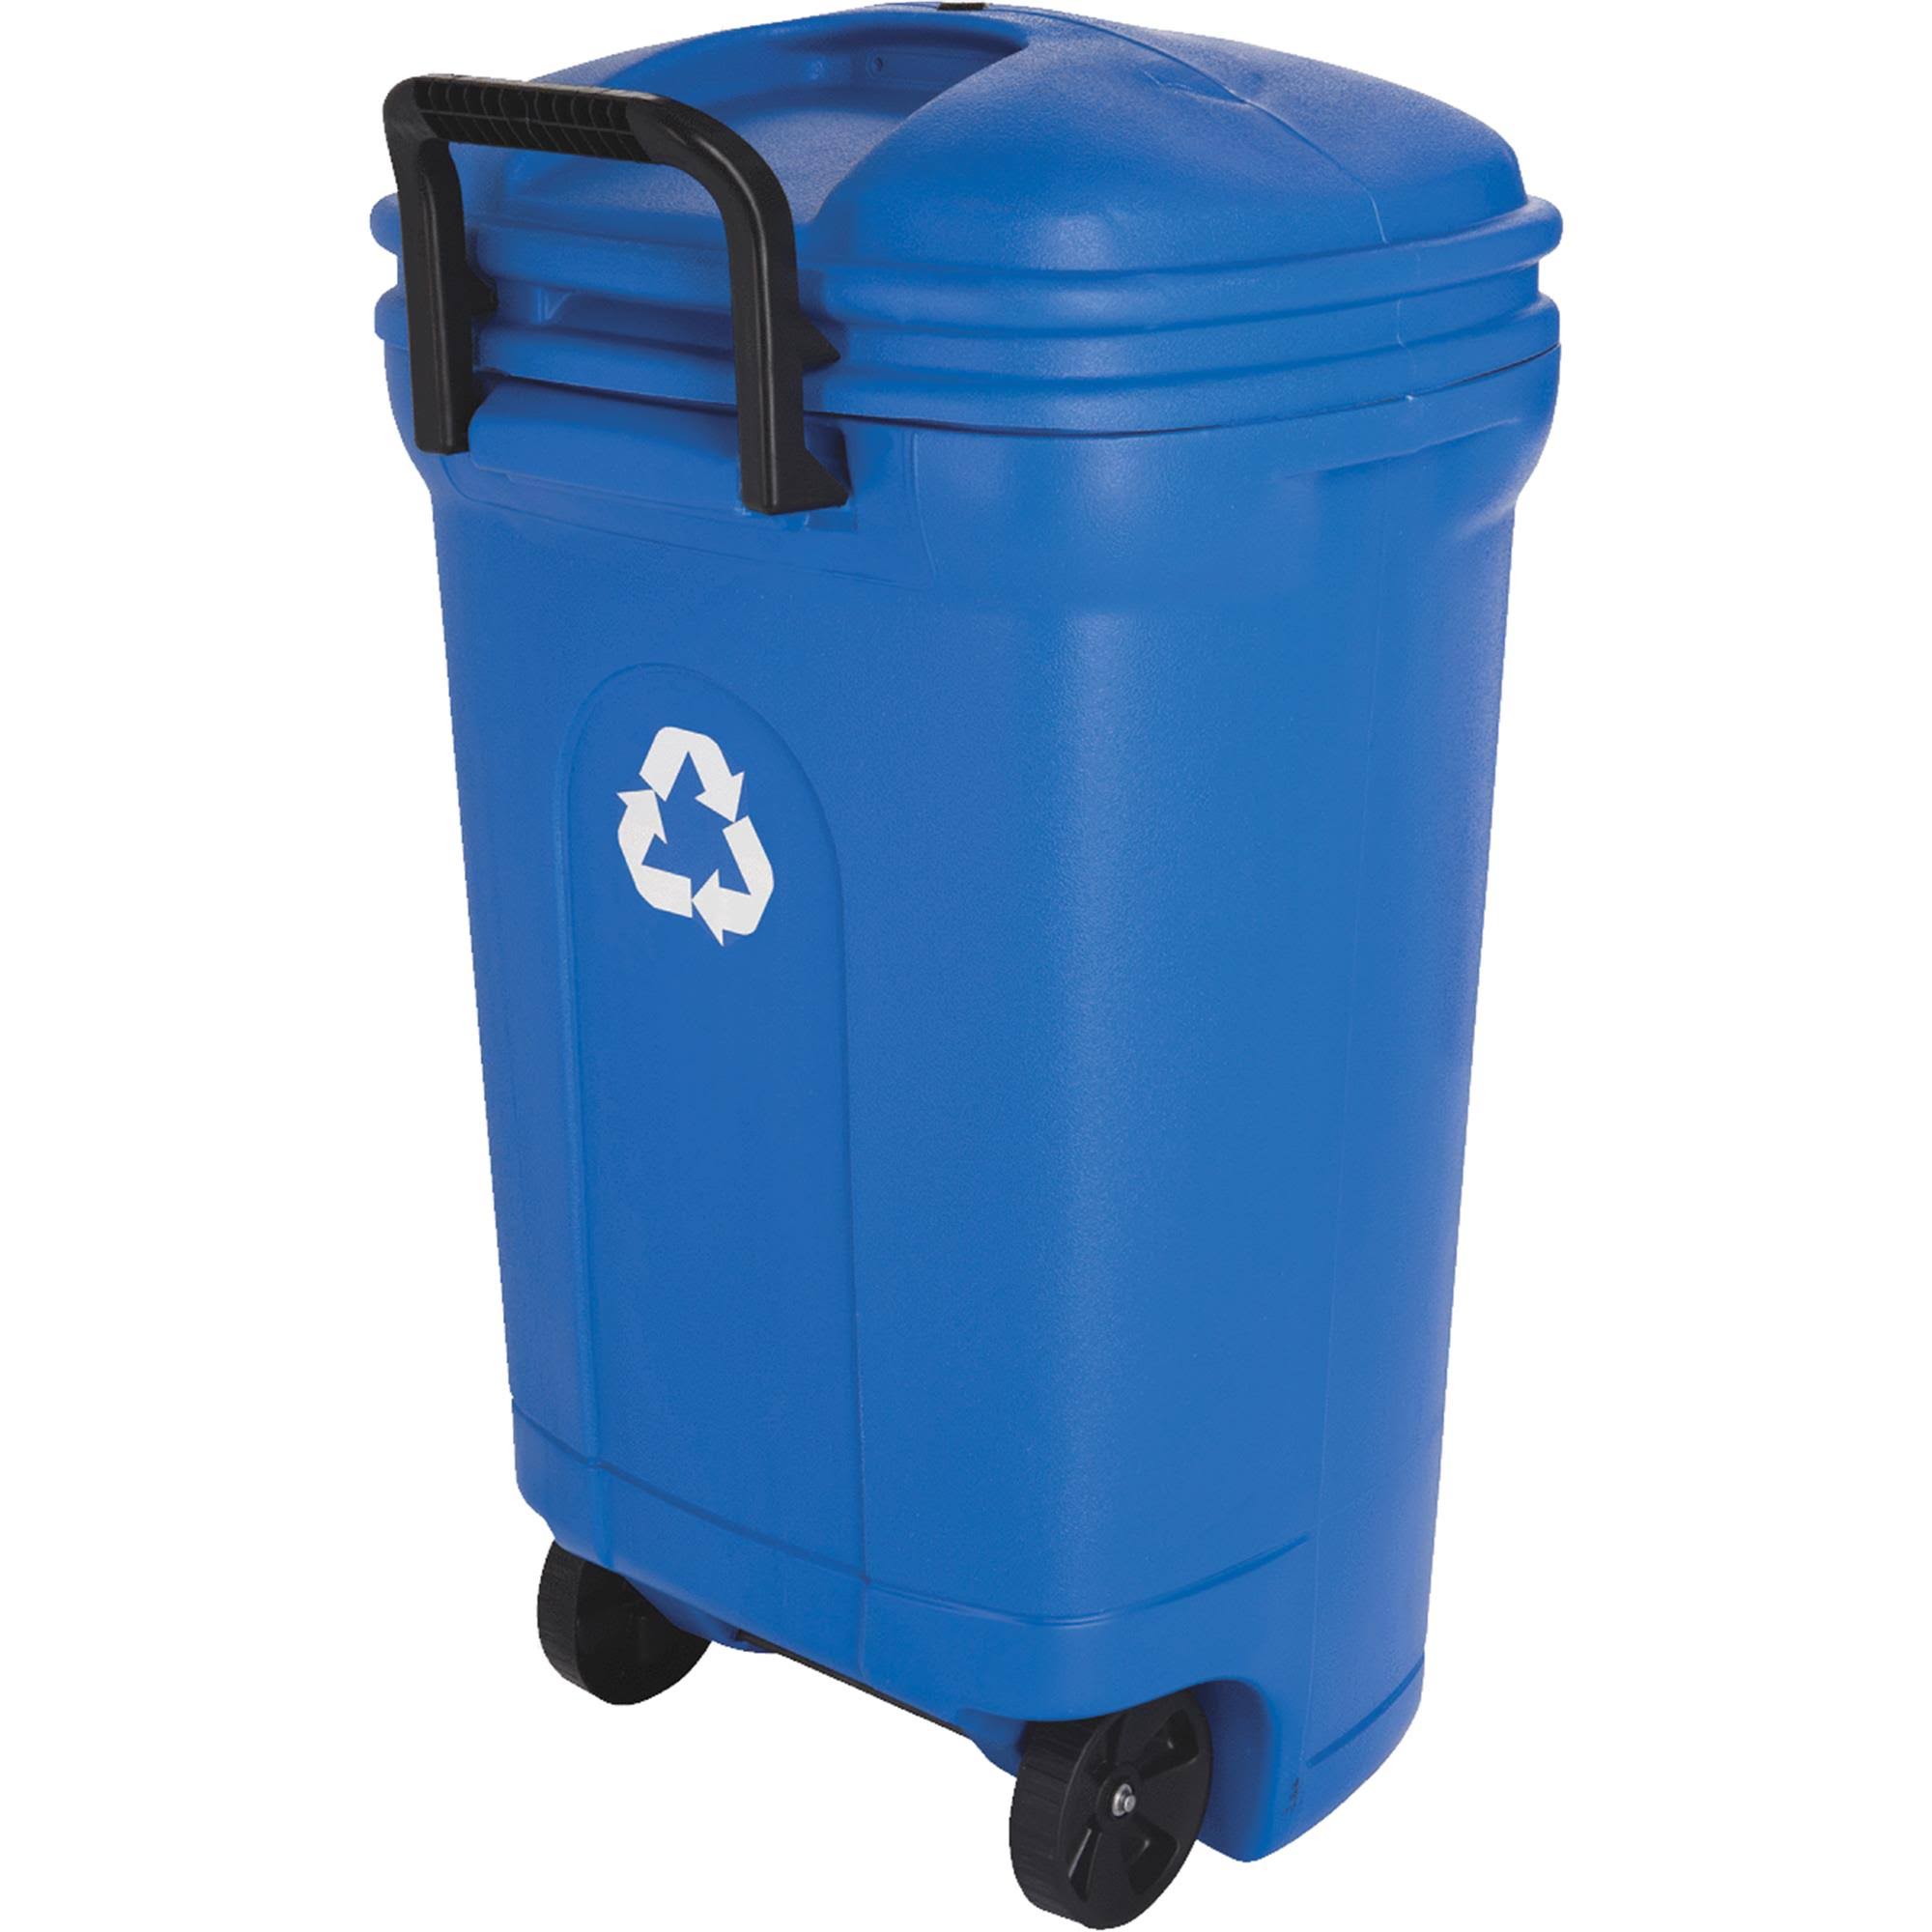 United Solutions Recycling Trash Can With Lid - Blue, 34 gal